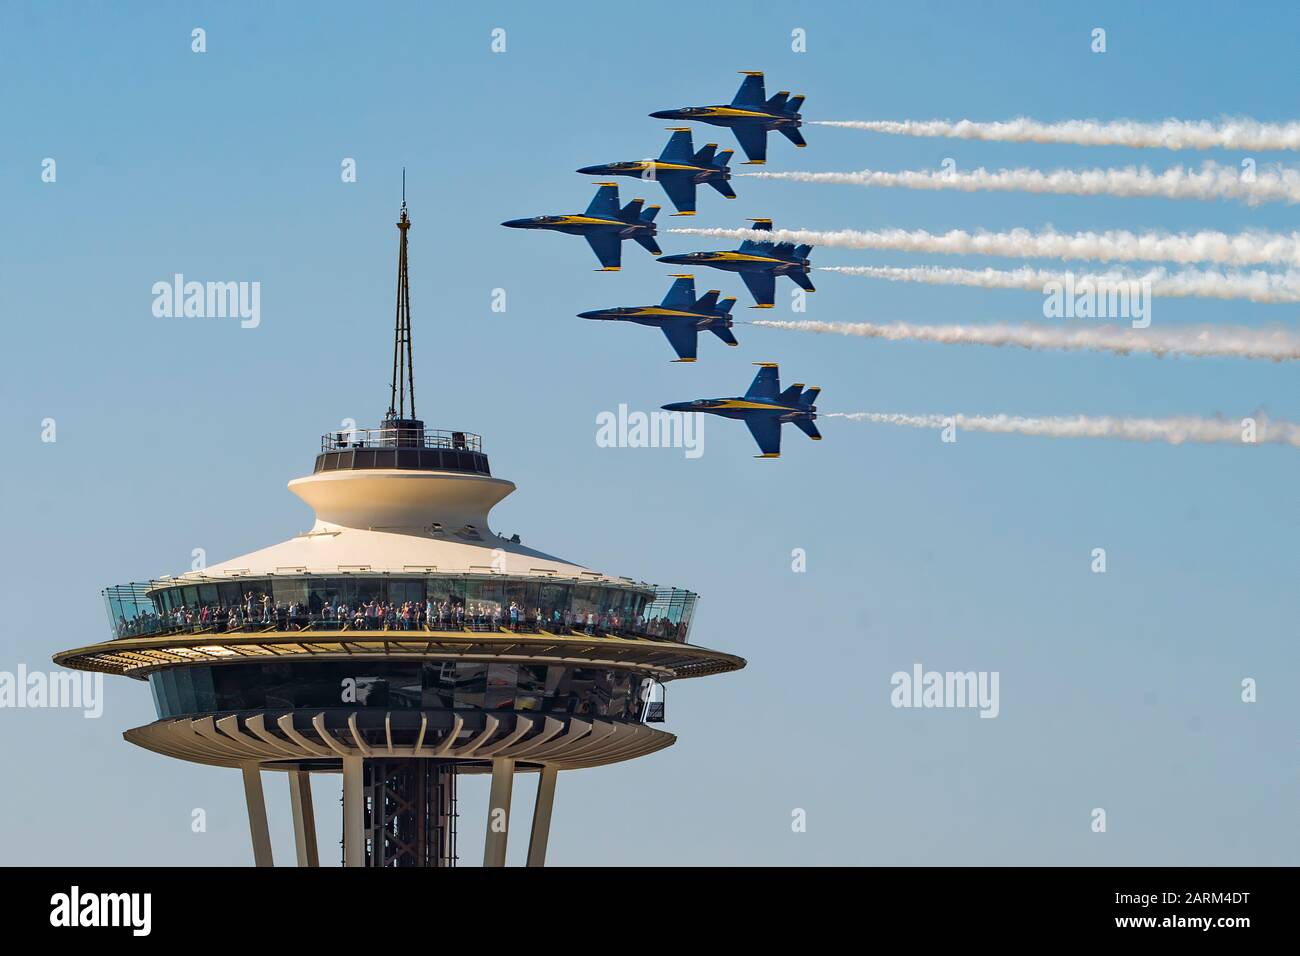 190804-N-OY339-1068 SEATTLE (Aug. 4, 2019) The U.S. Navy Flight Demonstration Squadron, the Blue Angels, pilots fly by the Space Needle during the Seattle Seafair Air Show. The Blue Angels are scheduled to conduct 61 flight demonstrations at 32 locations across the country to showcase the pride and professionalism of the U.S. Navy and Marine Corps to the American public in 2019. (U.S. Navy photo by Mass Communication Specialist 2nd Class Christopher Gordon/Released) Stock Photo